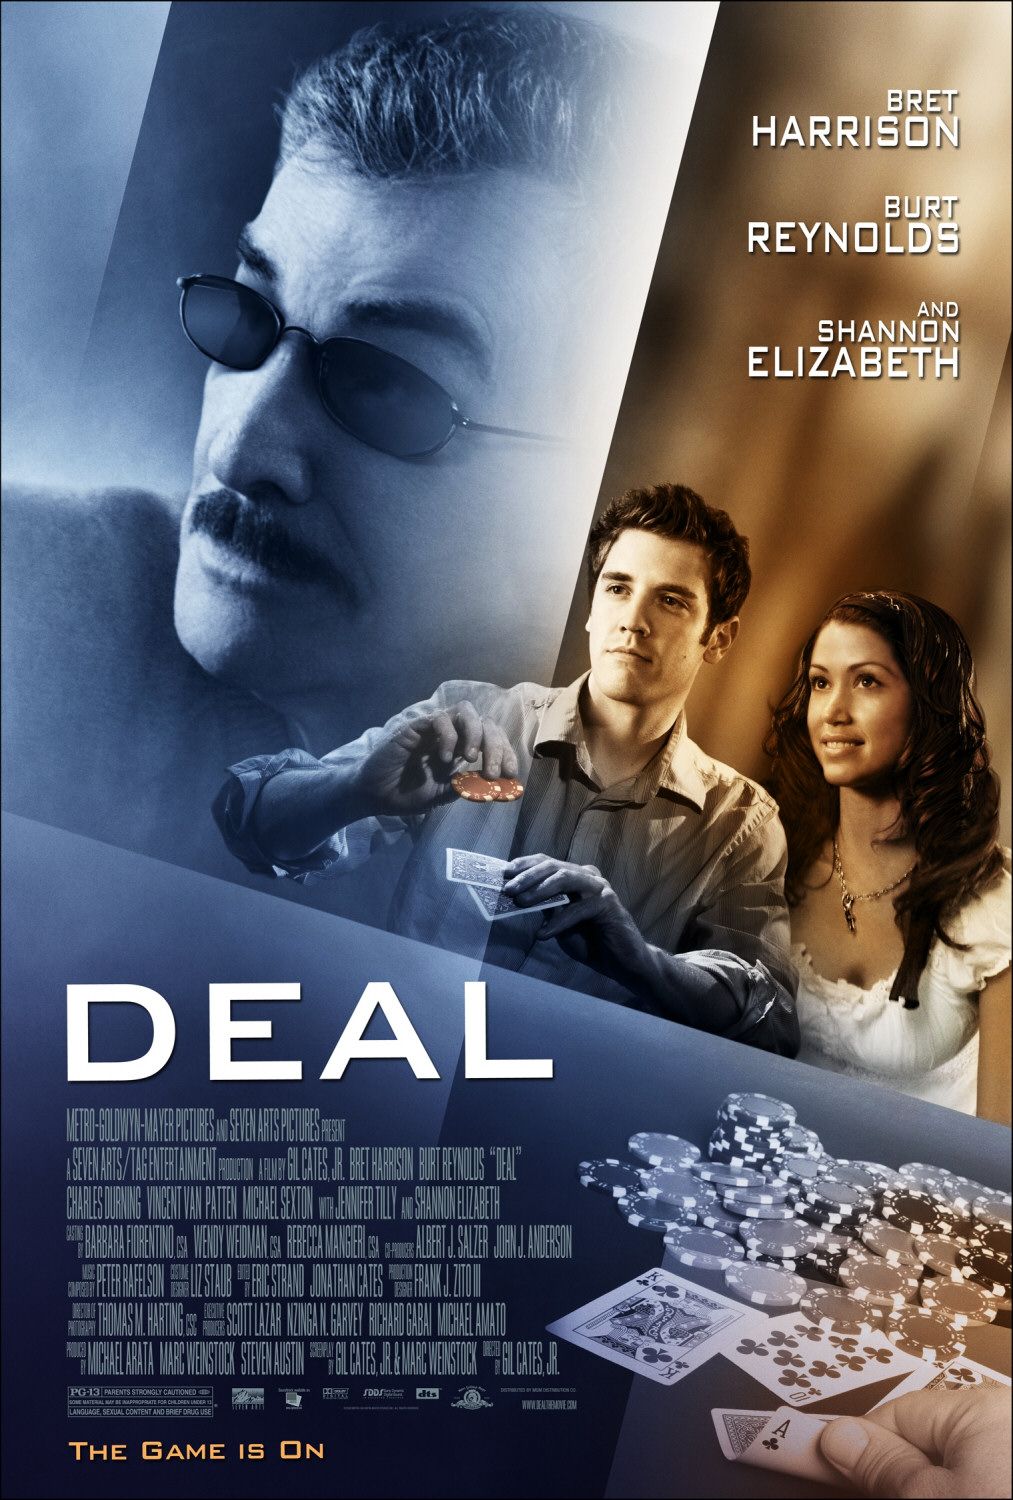 How To Deal Full Movie